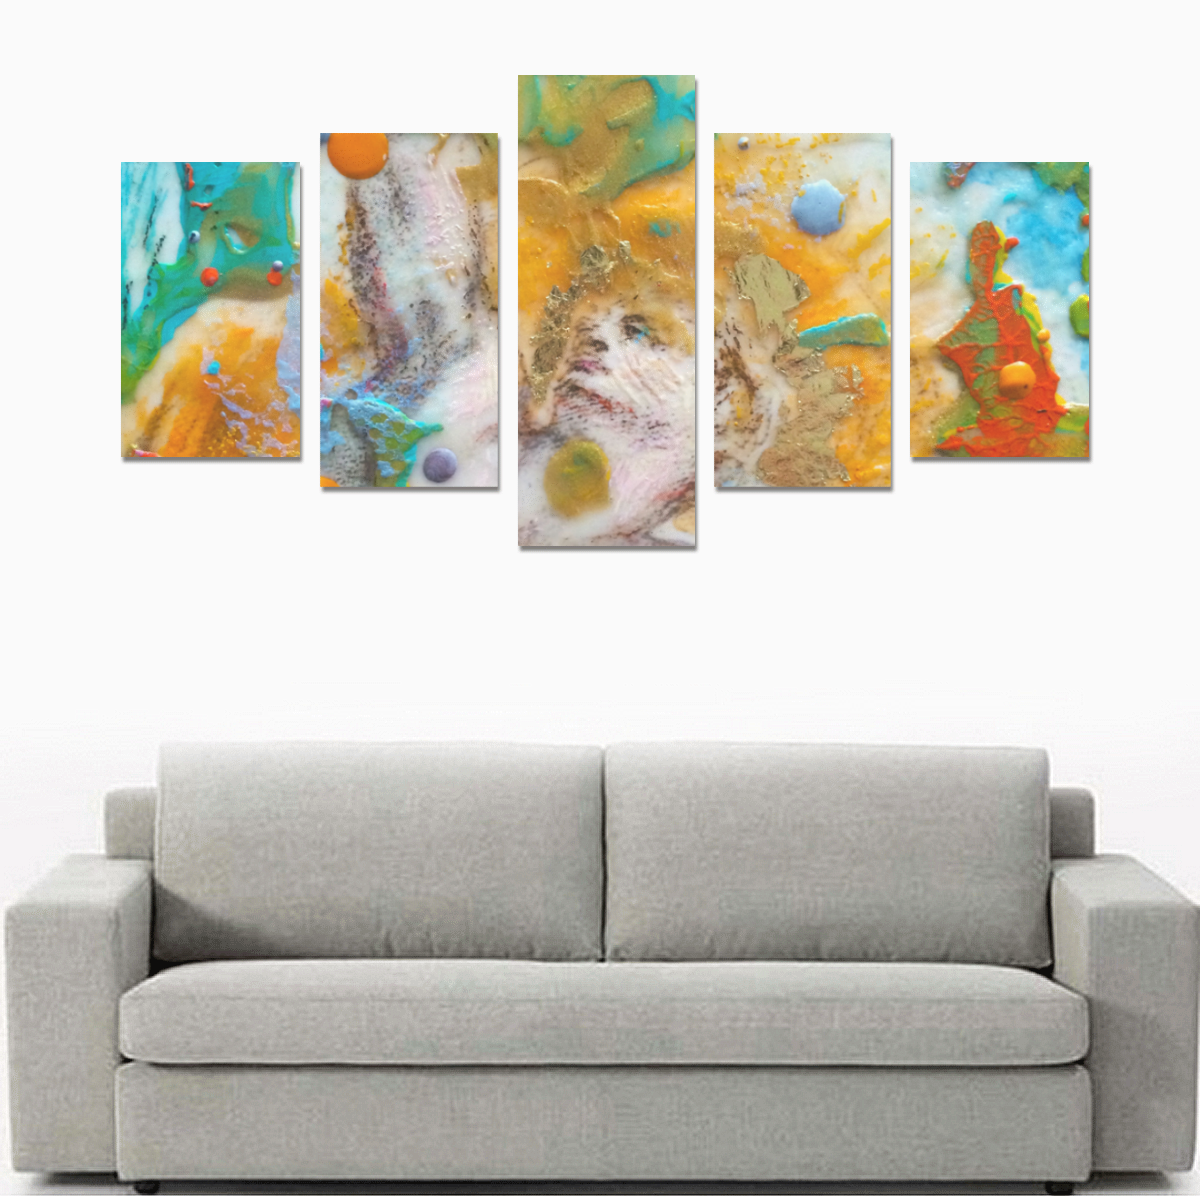 Herald 5 Wall hanging Canvas Print Sets C (No Frame)